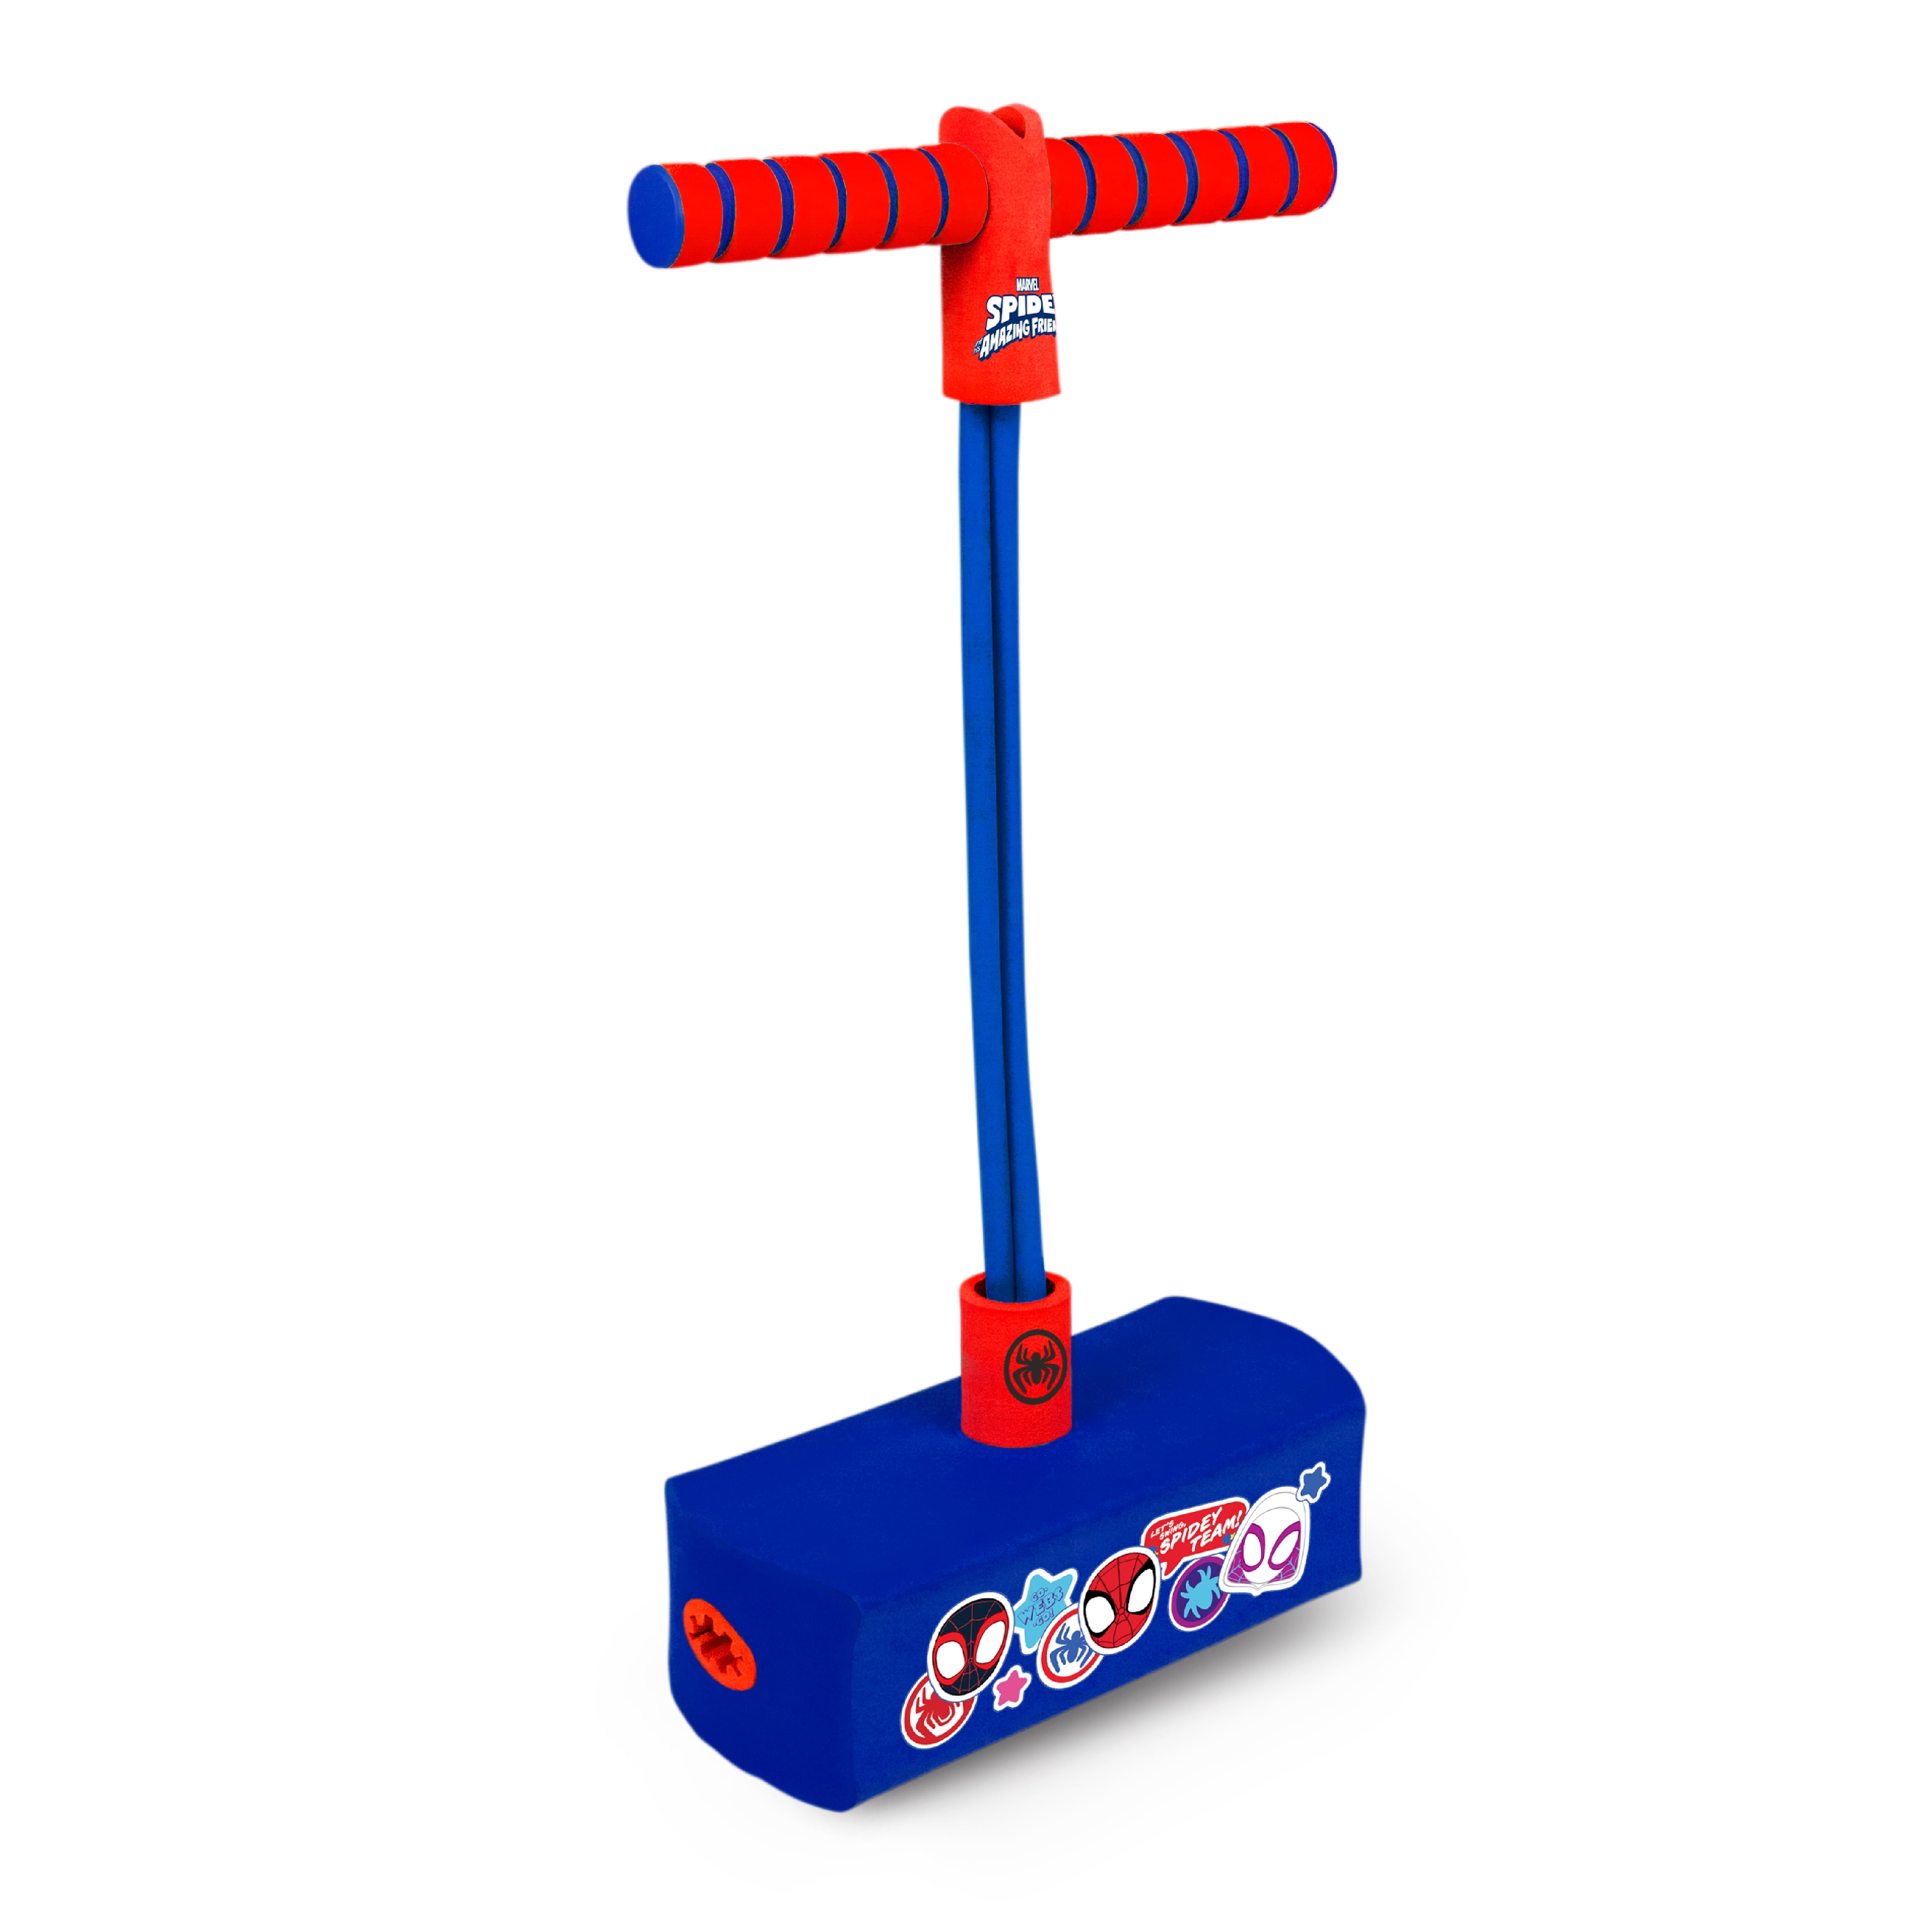 Flybar My First Foam Pogo Jumper for Kids Fun and Safe Pogo Stick for Toddler... 